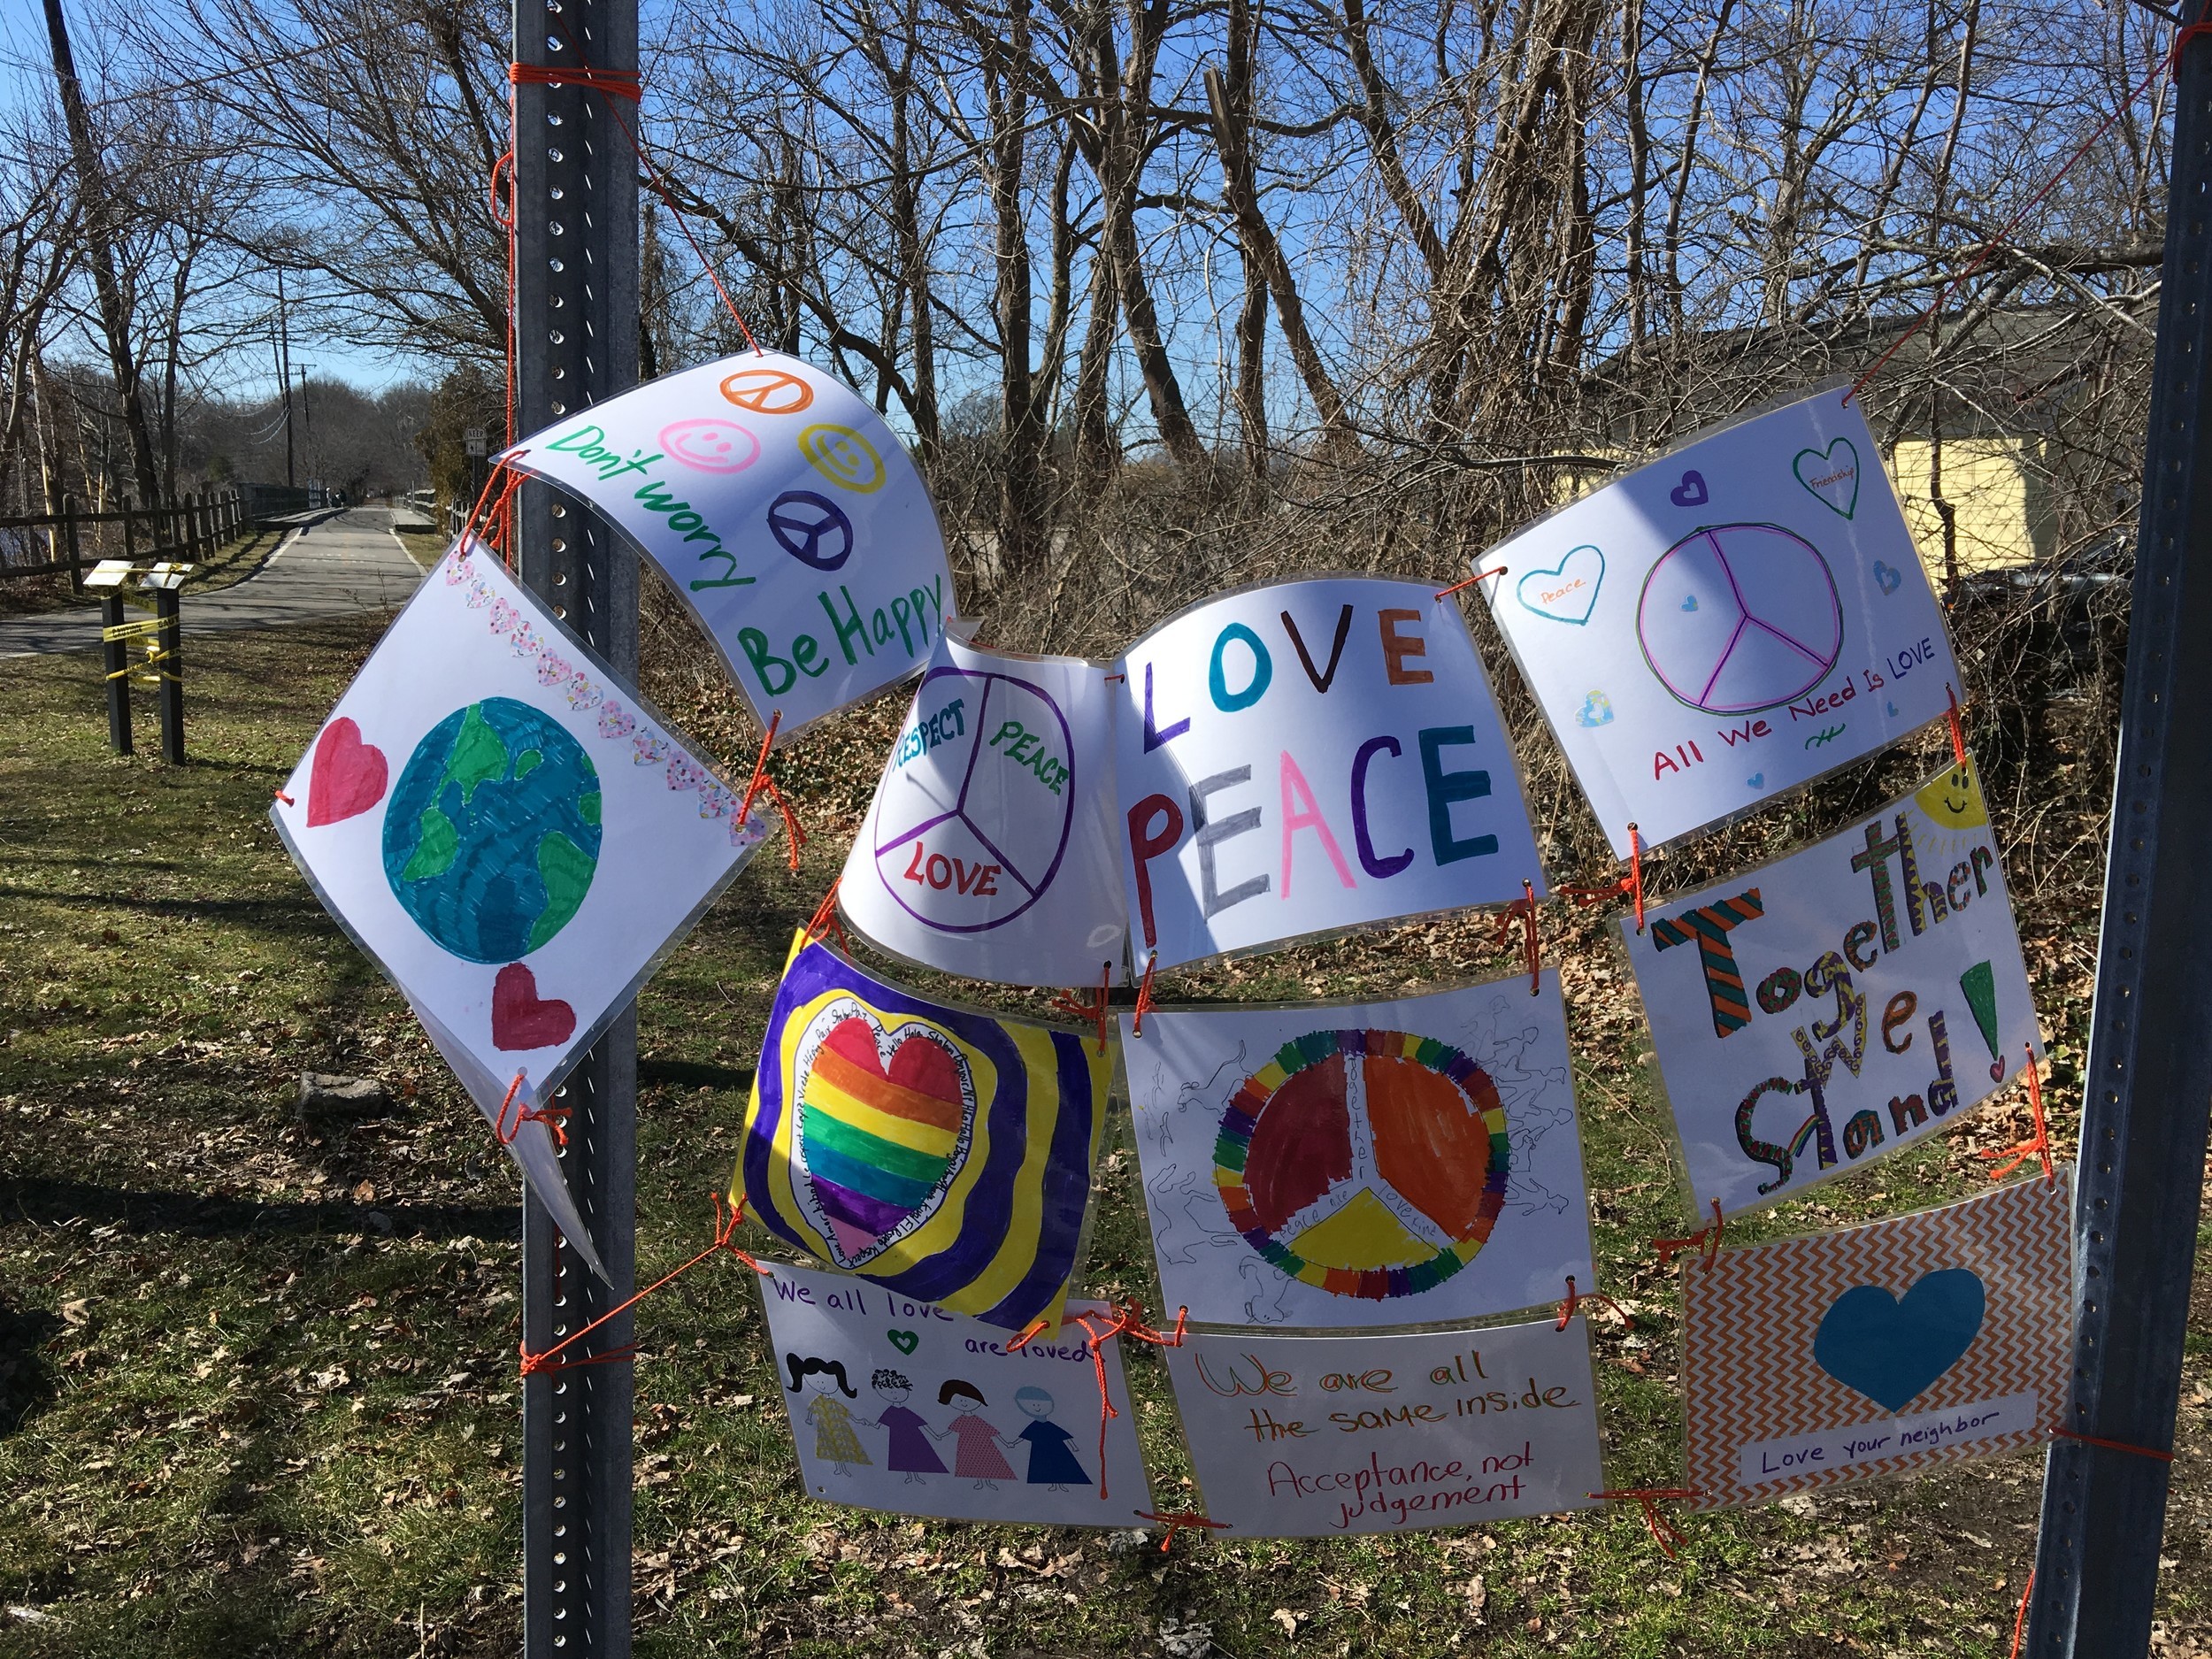 Signs sharing messages of peace, love and unity greet people near the intersection of New Meadow Road and the bike path.